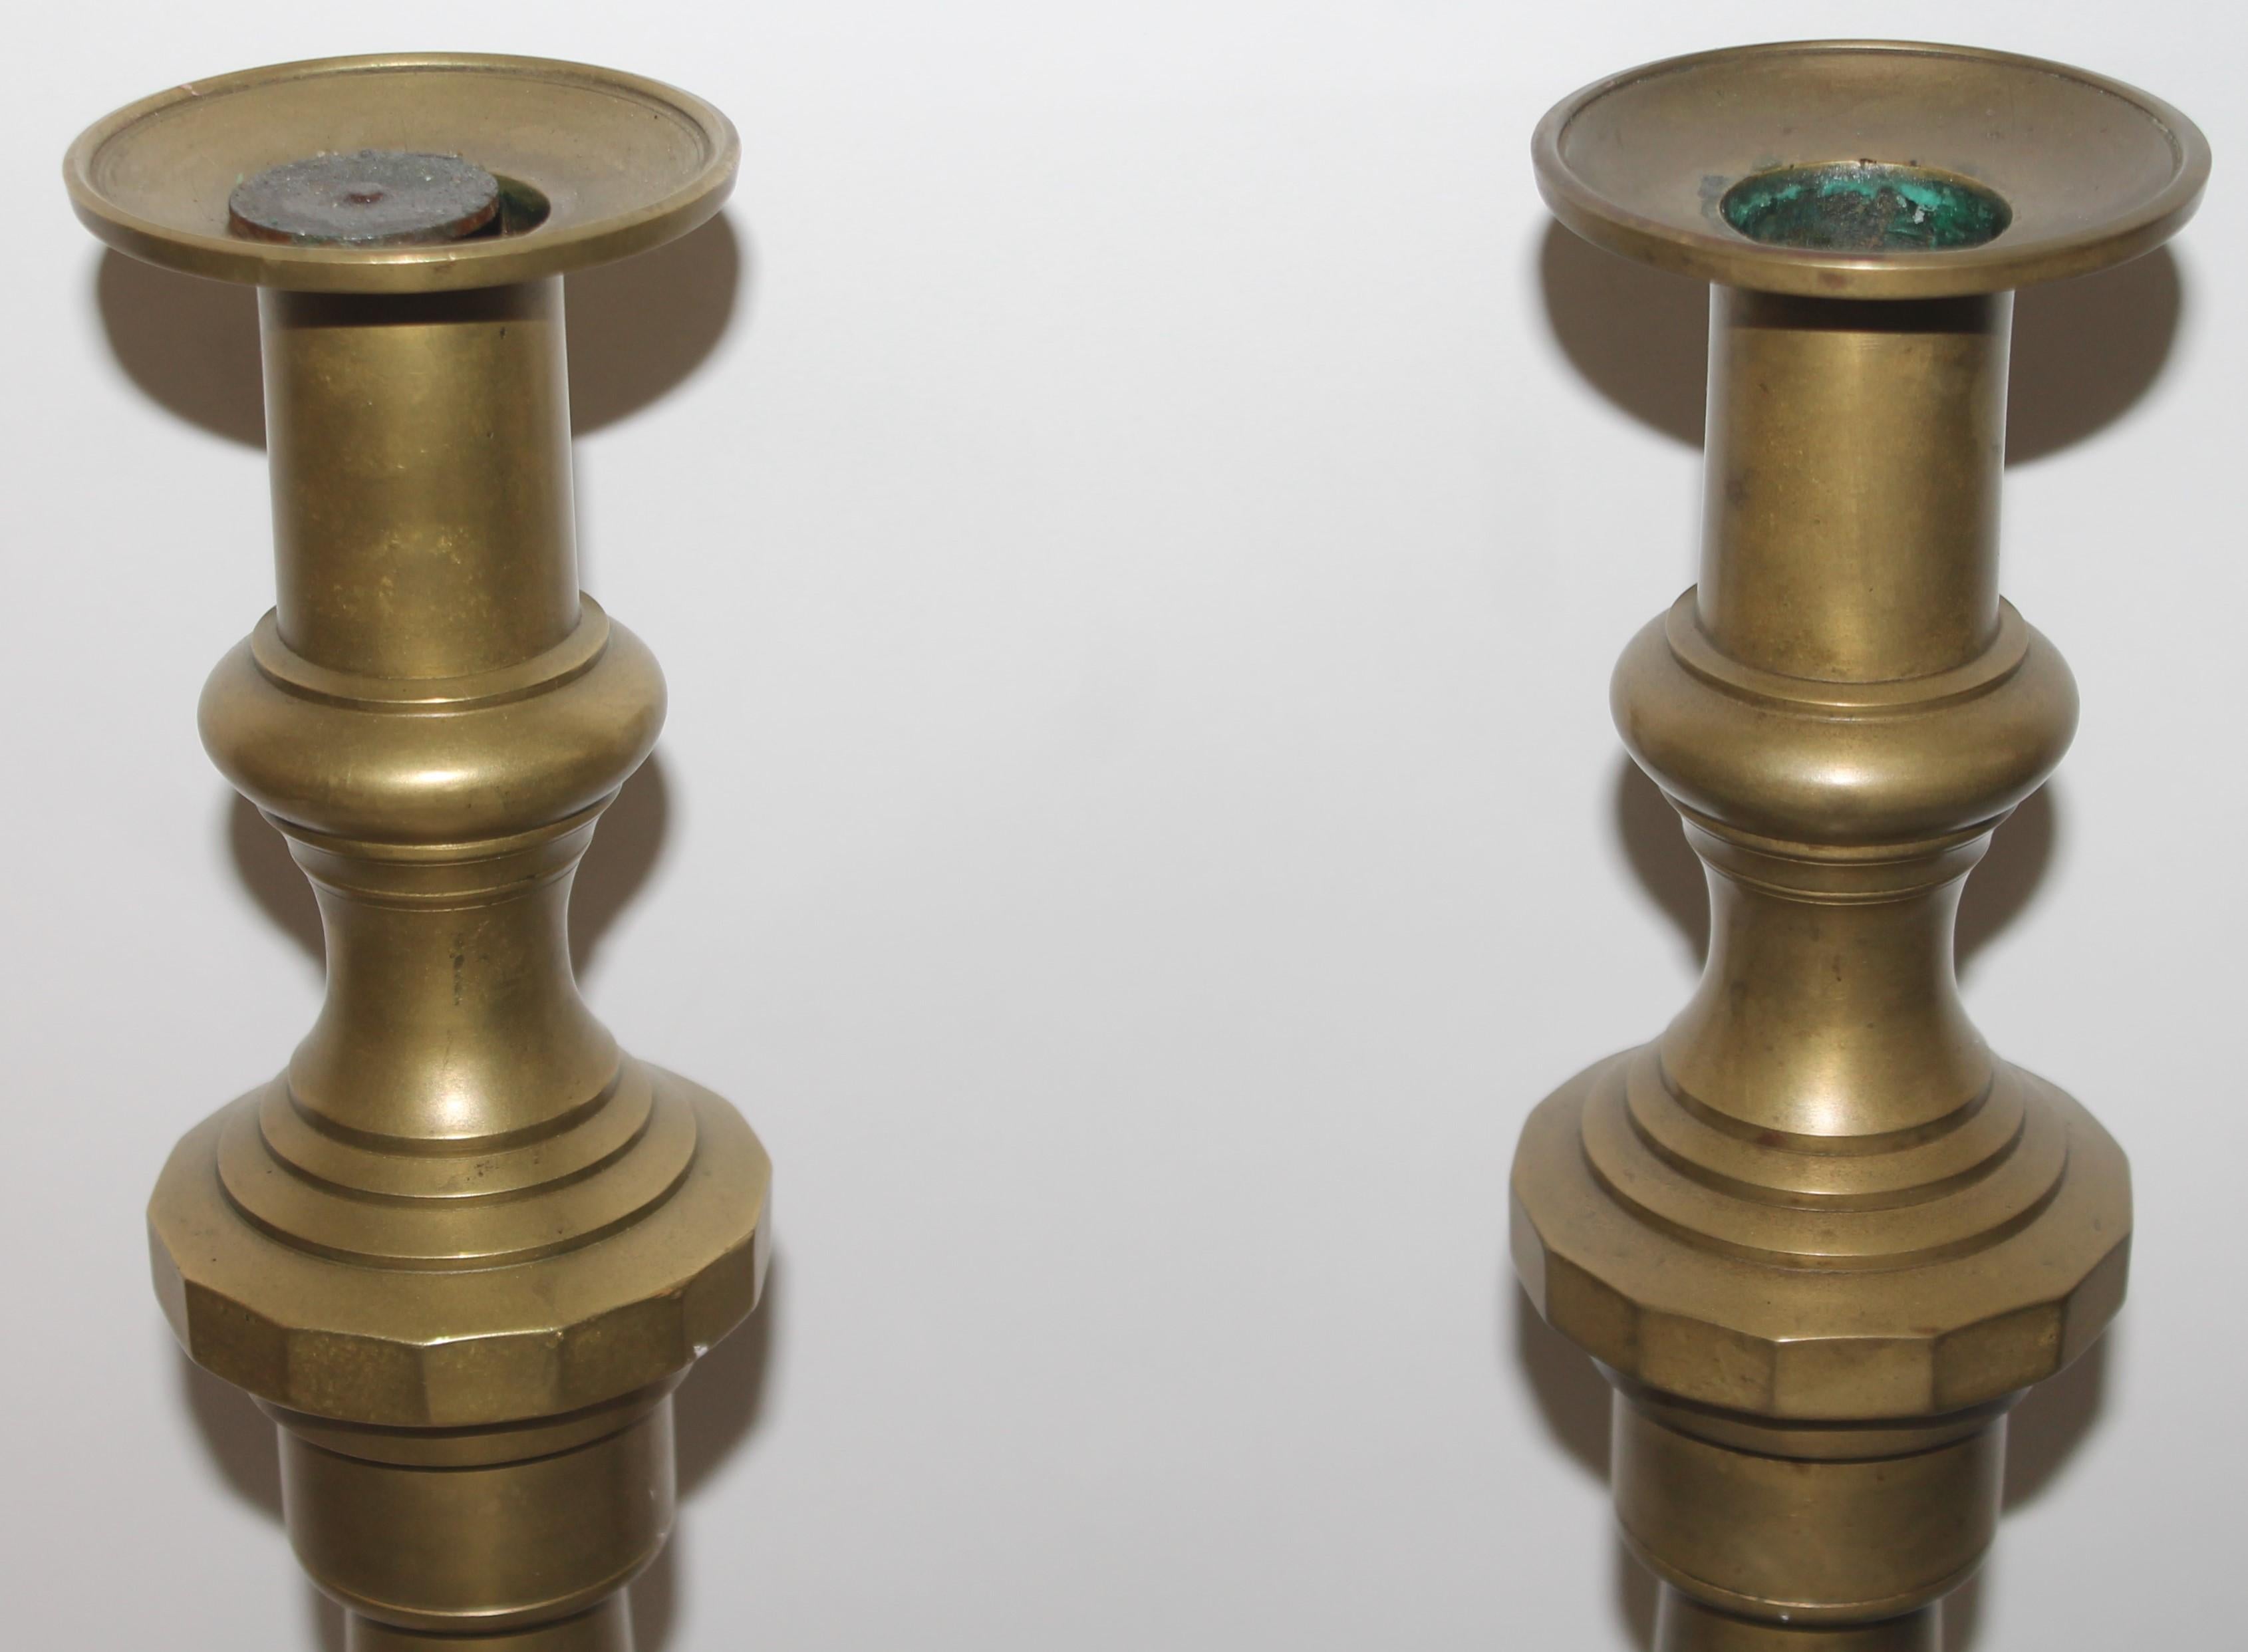 American Monumental 19th Century Brass Candlestick Holders, Pair